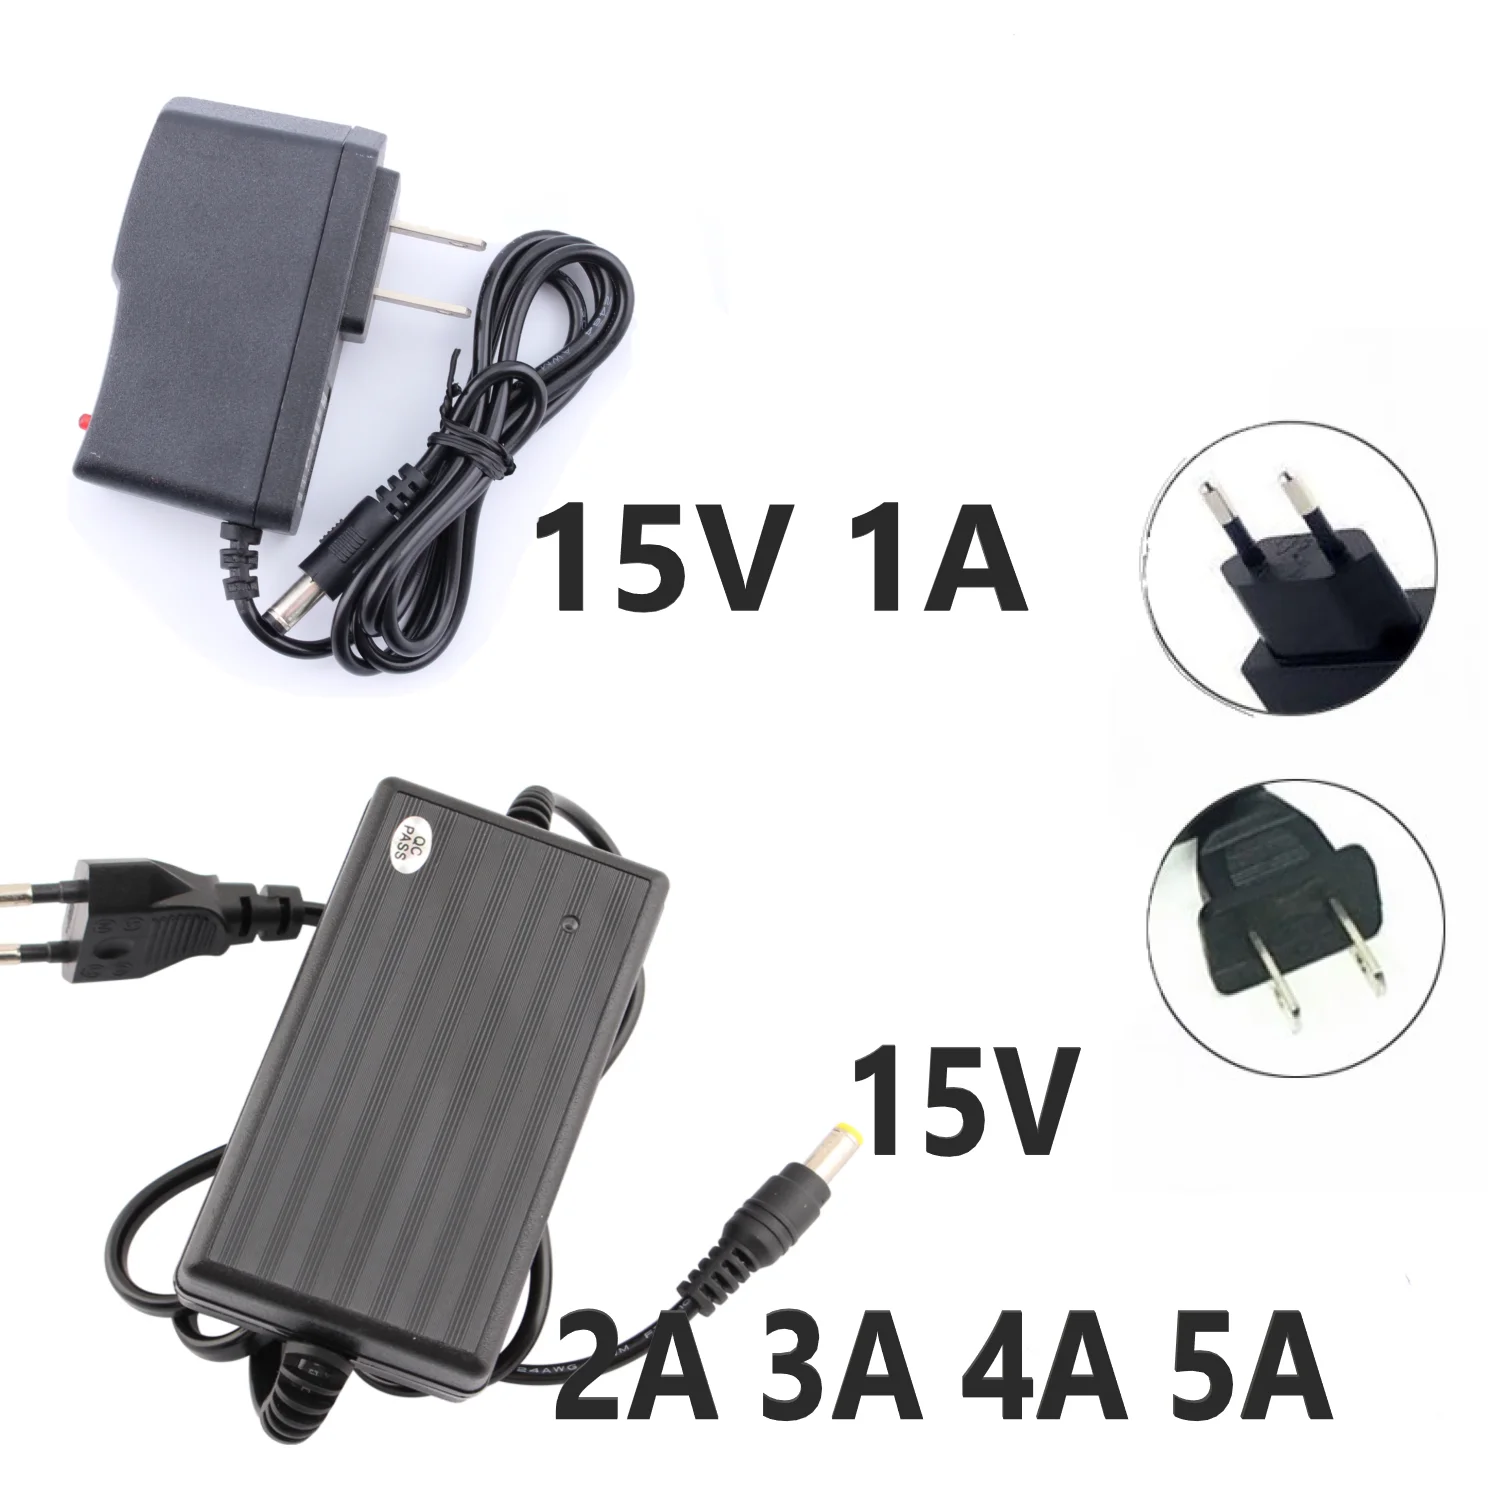 

Power Adapter 15V 1A 2A 3A 4A 5A Universal Power Adaptor 15 V Volt Power Supply Electric Transformer LED Driver Charging Charger